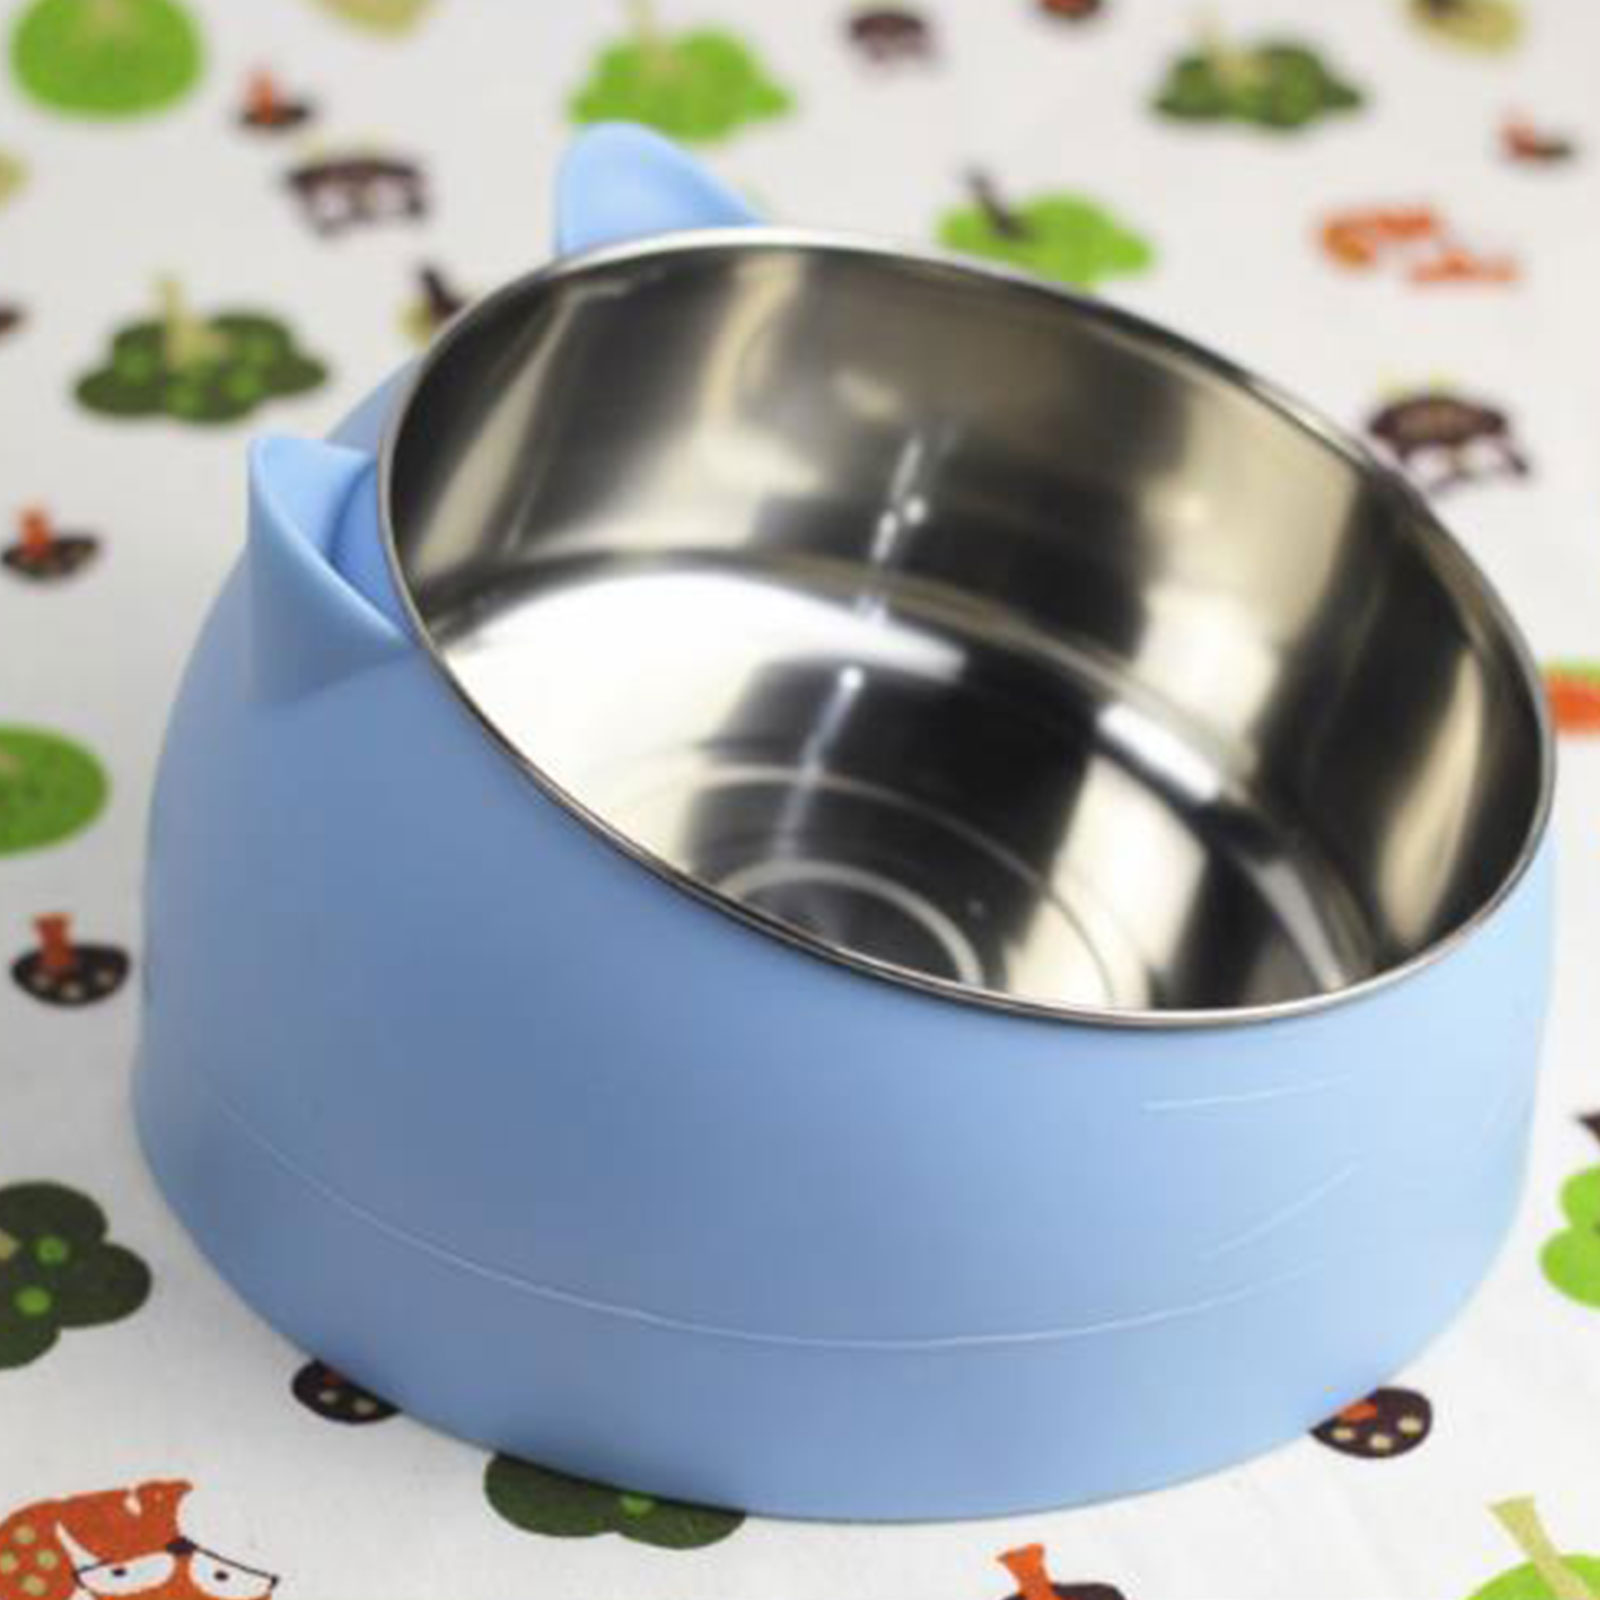 Pet Heating Bowl Cat Thermostatic Bowl Heating Dog Bowl Cat Bowl Chickens Pet Supplies Dogs Adjustable Cat Food Bowl - image 3 of 9